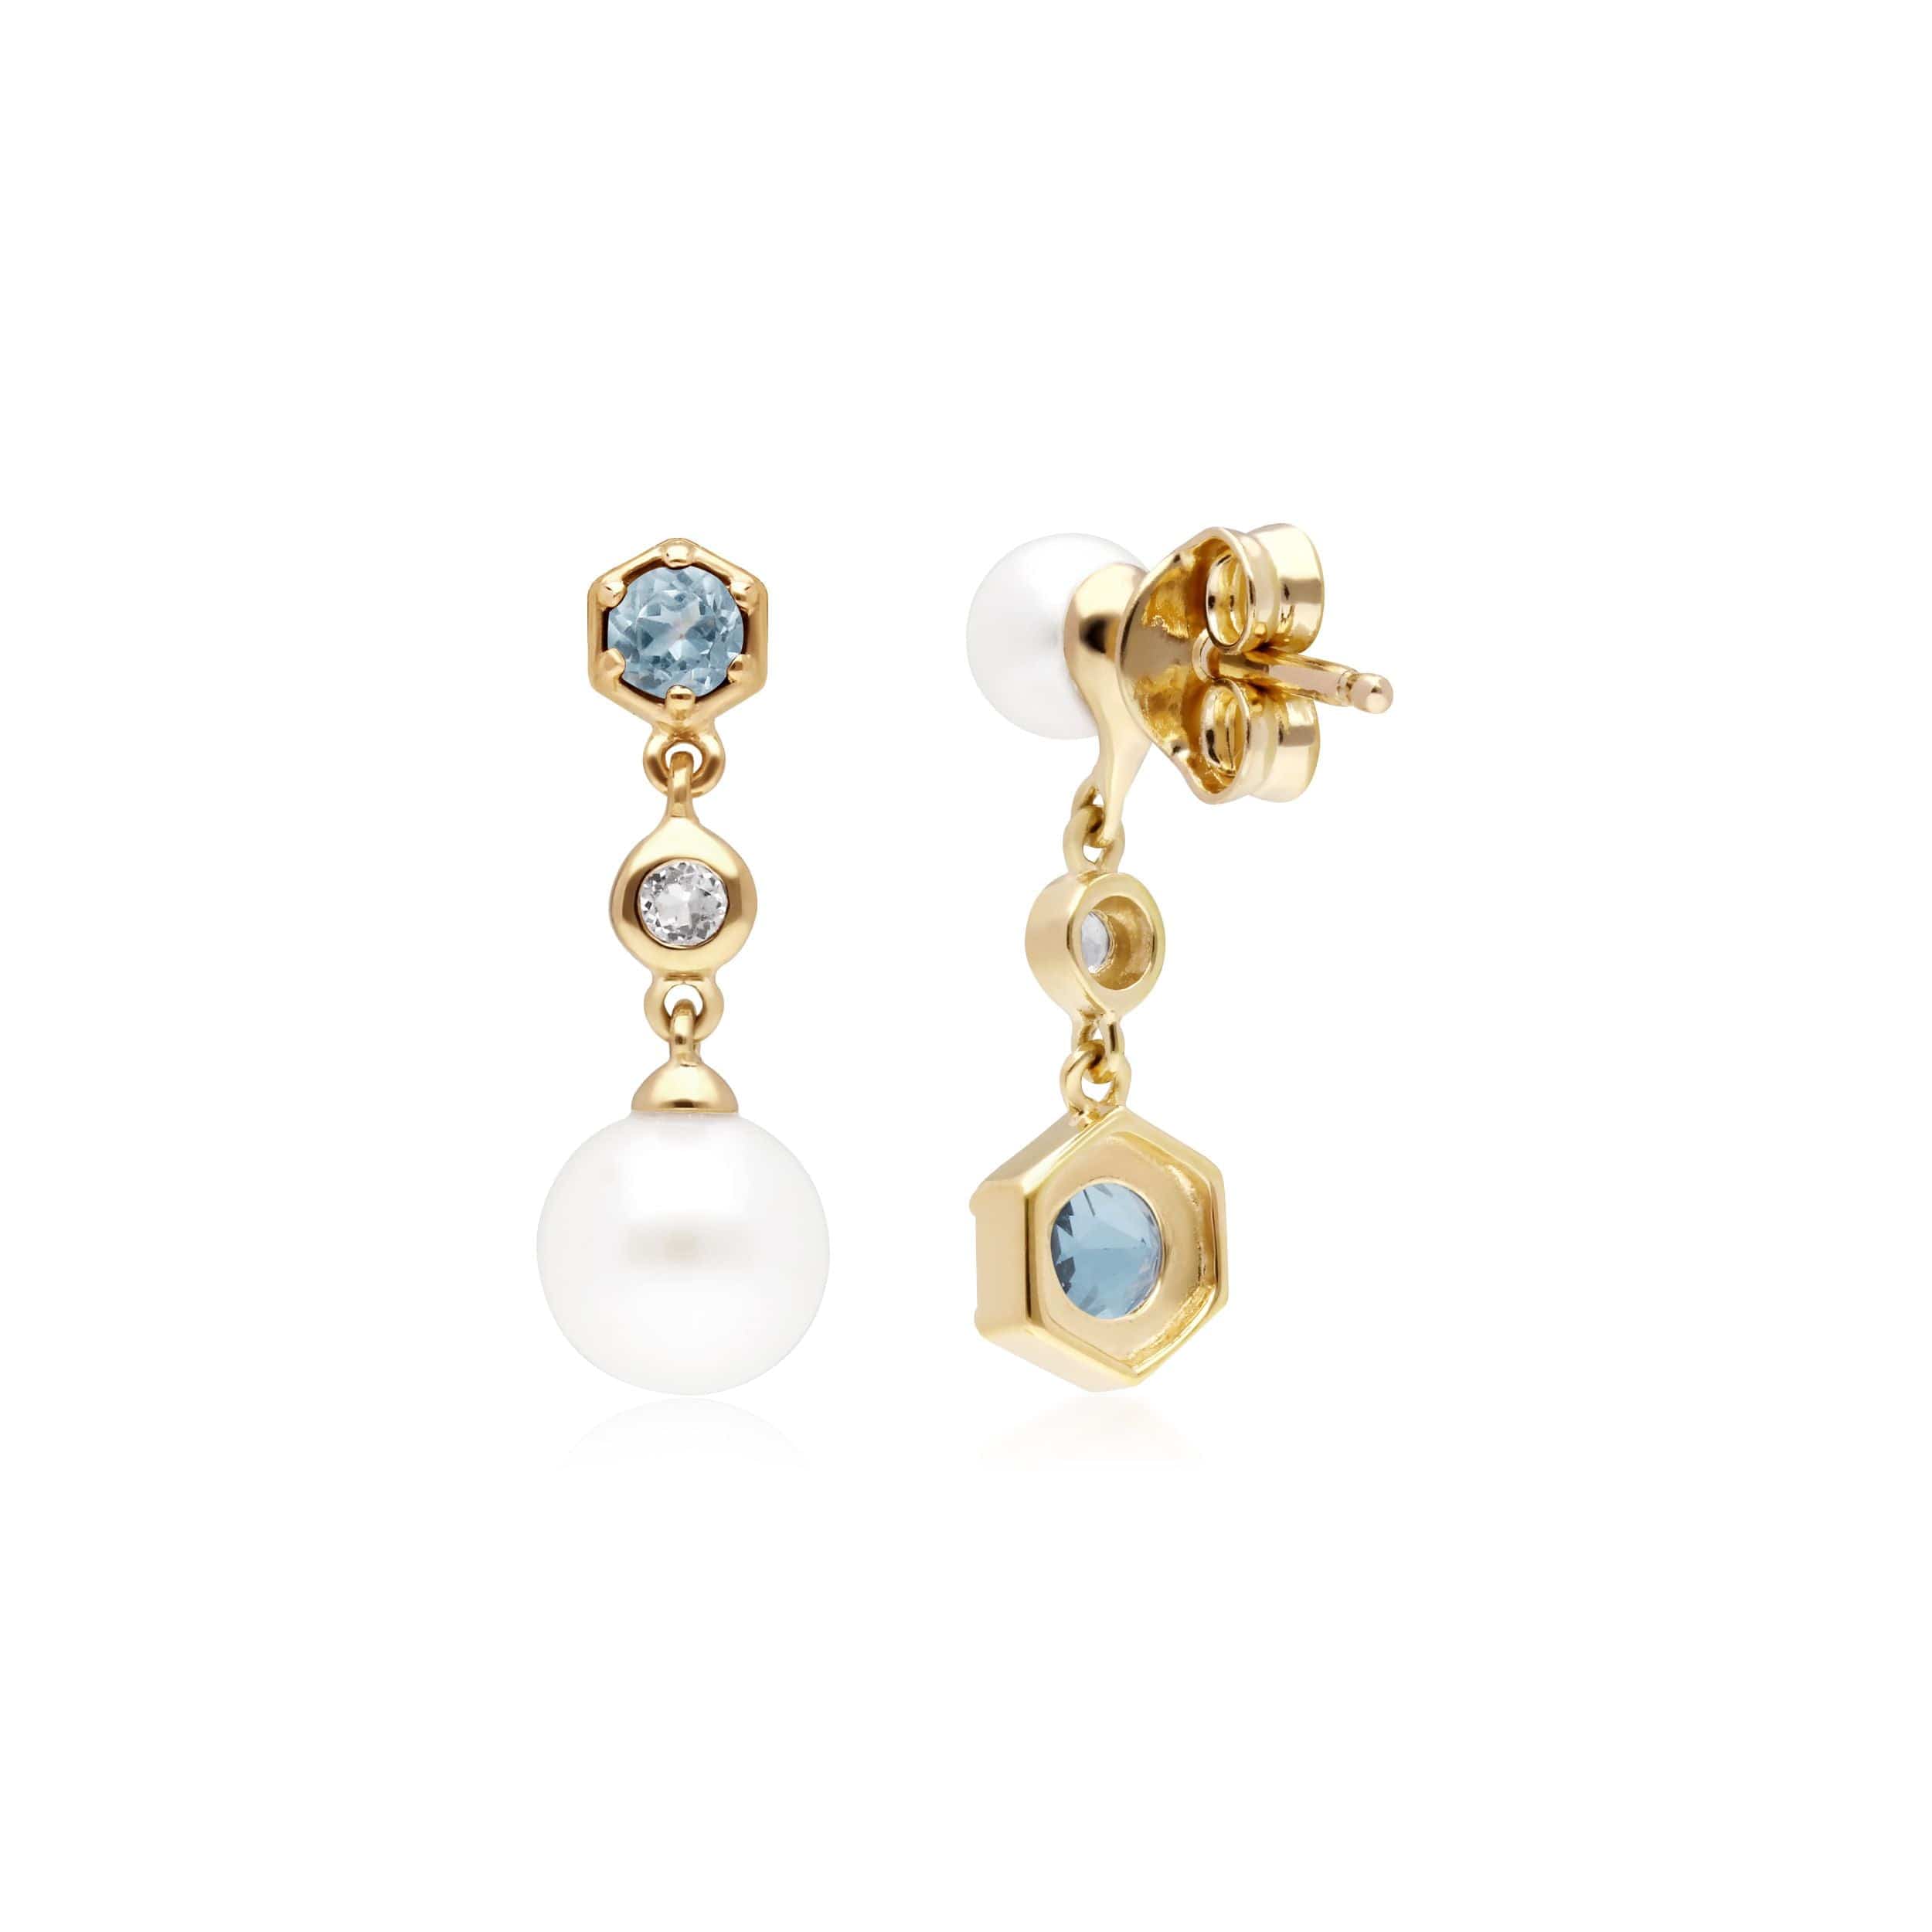 270E030110925 Modern Pearl, White & Blue Topaz Mismatched Drop Earrings in Gold Plated Silver 2